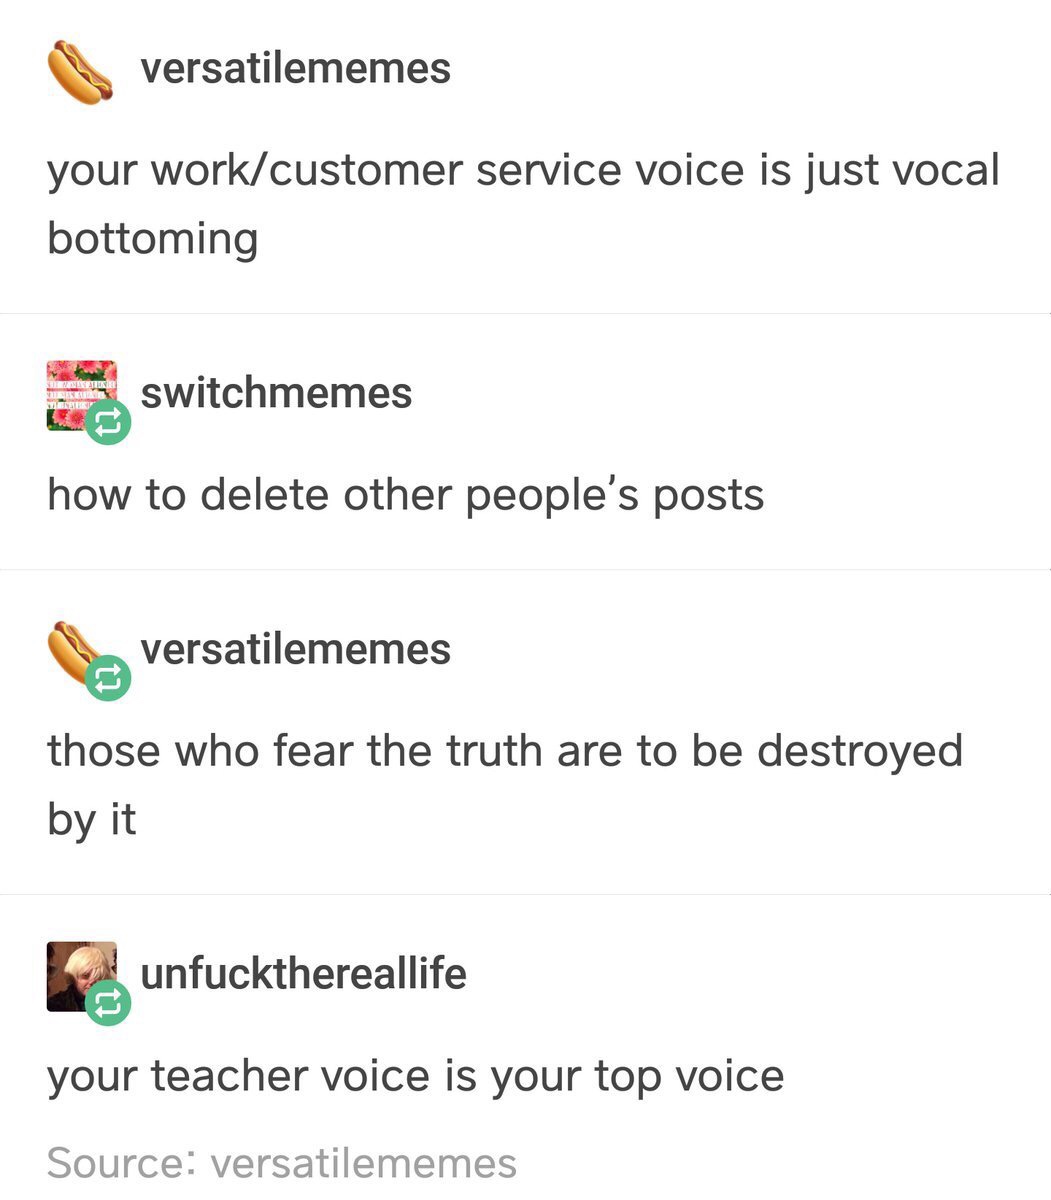 document - versatilememes your workcustomer service voice is just vocal bottoming switchmemes how to delete other people's posts versatilememes those who fear the truth are to be destroyed by it unfuckthereallife your teacher voice is your top voice Sourc